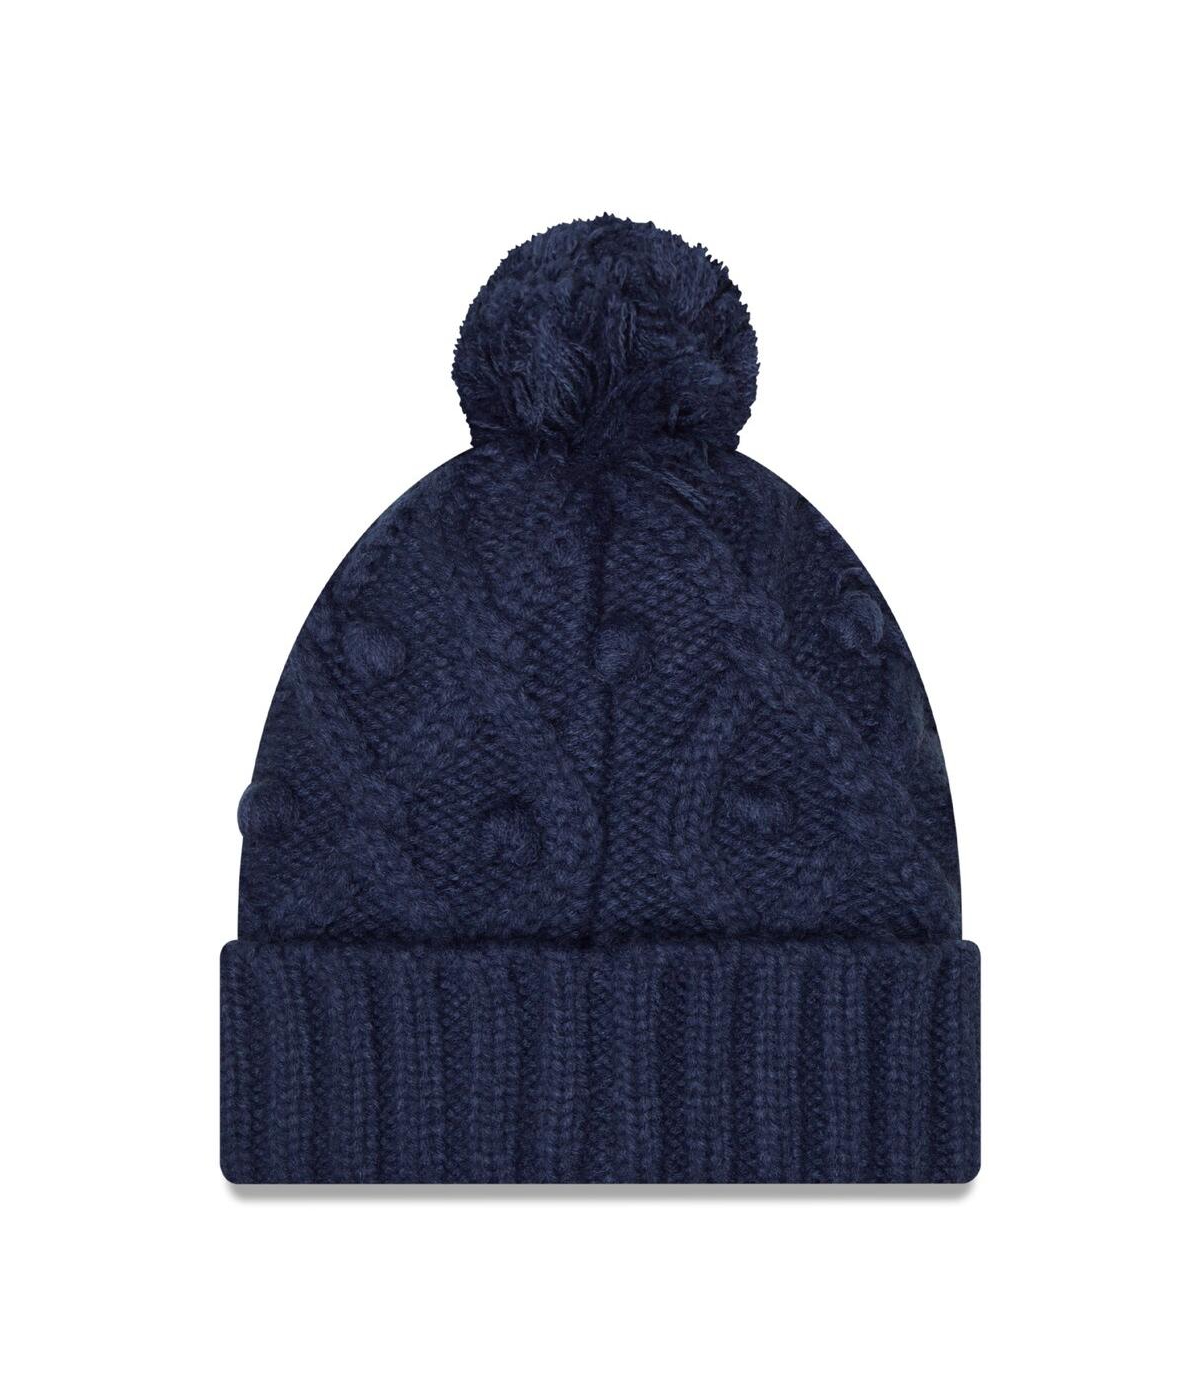 Shop New Era Women's  College Navy Seattle Seahawks Toasty Cuffed Knit Hat With Pom